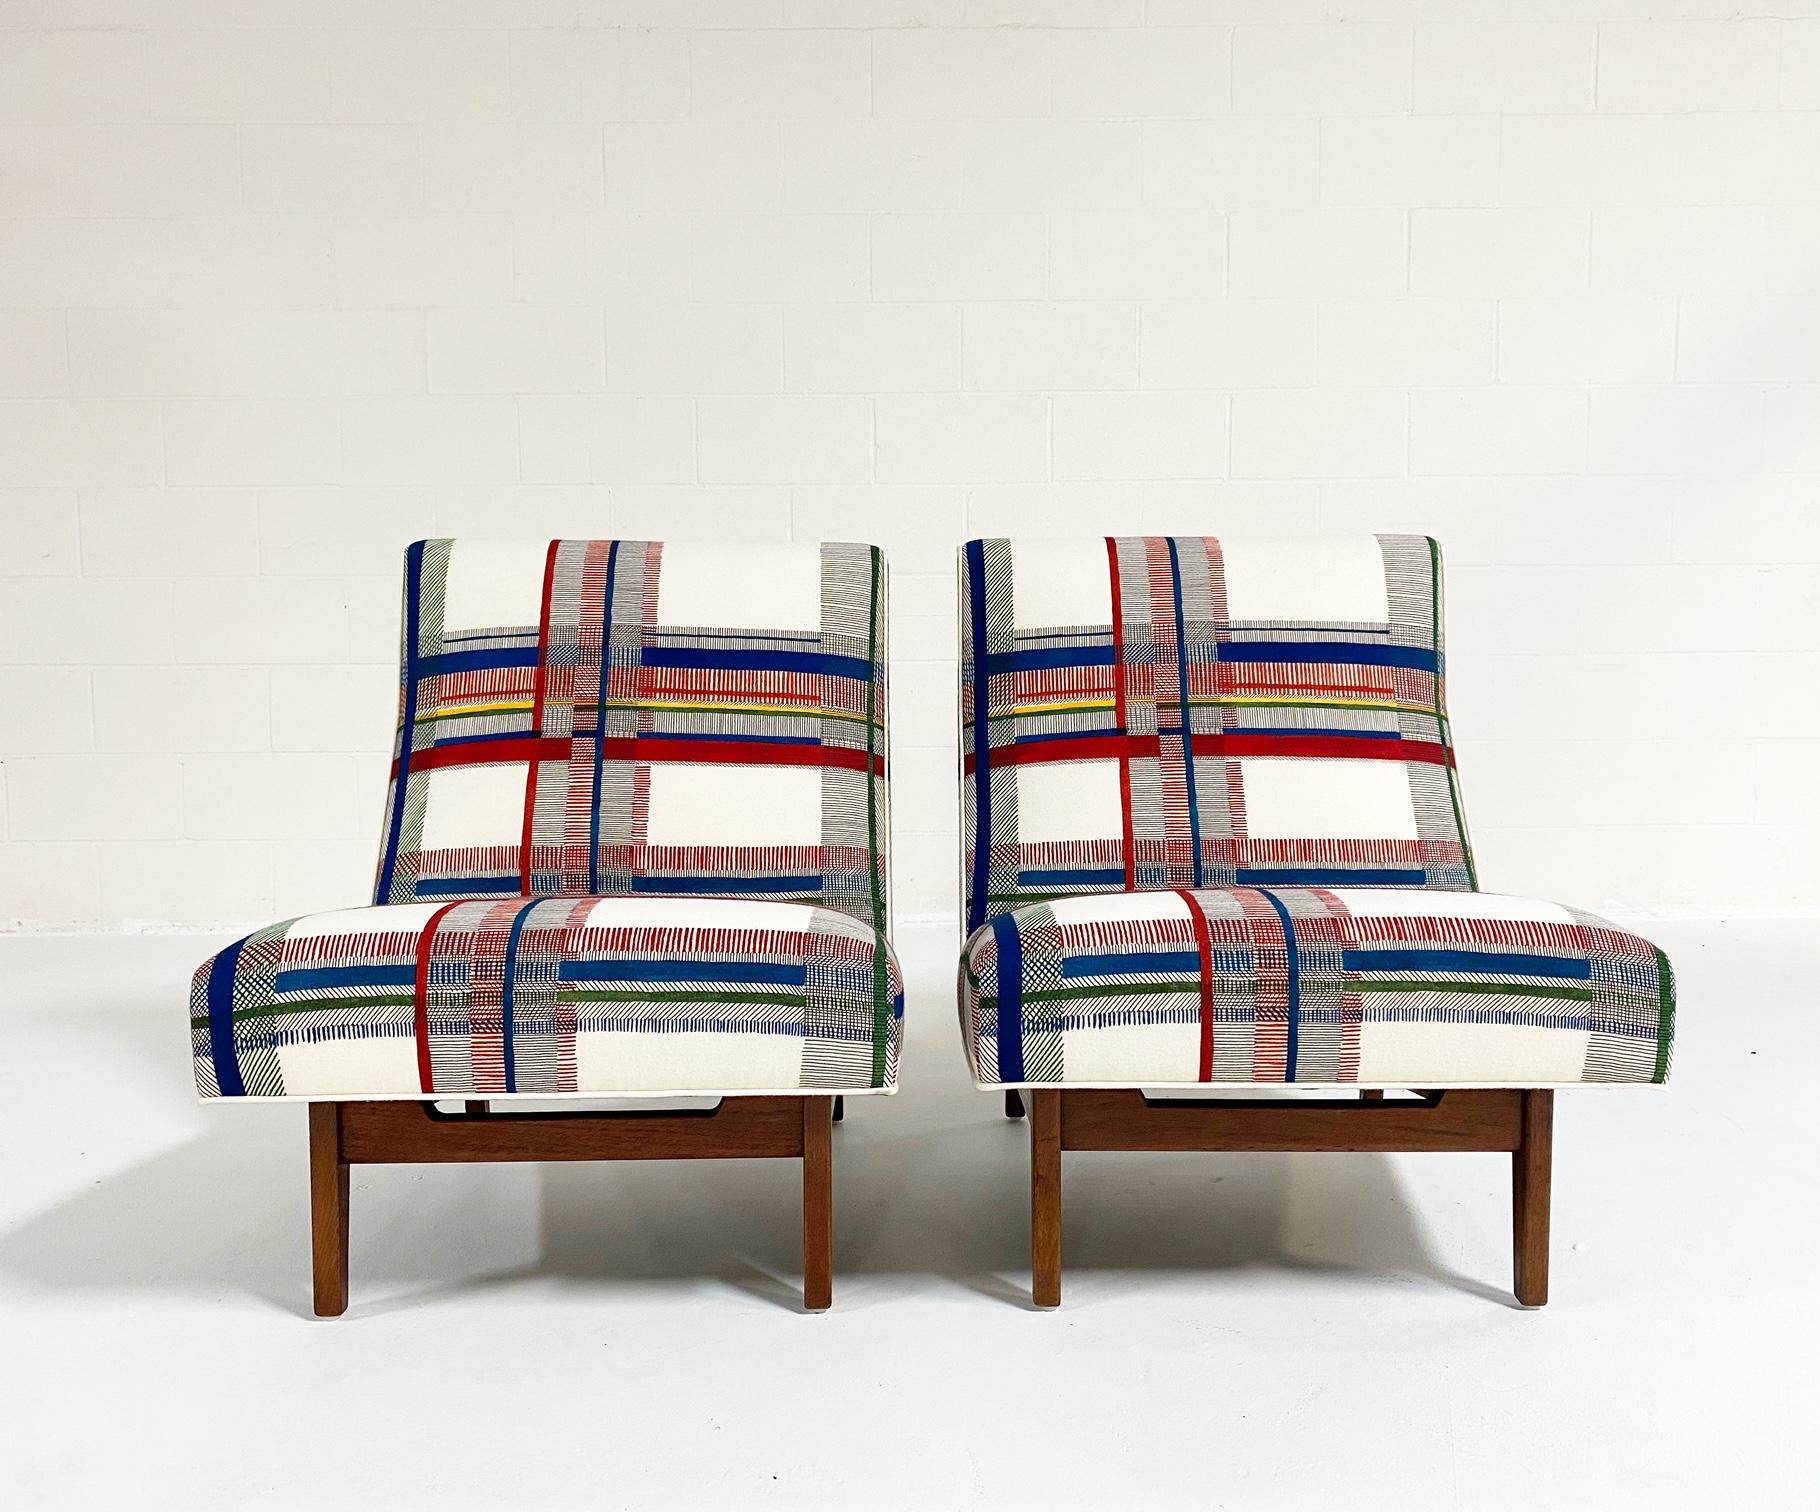 One of a Kind Vintage Jens Risom Slipper Chair in Hermès Wool, One Available 6